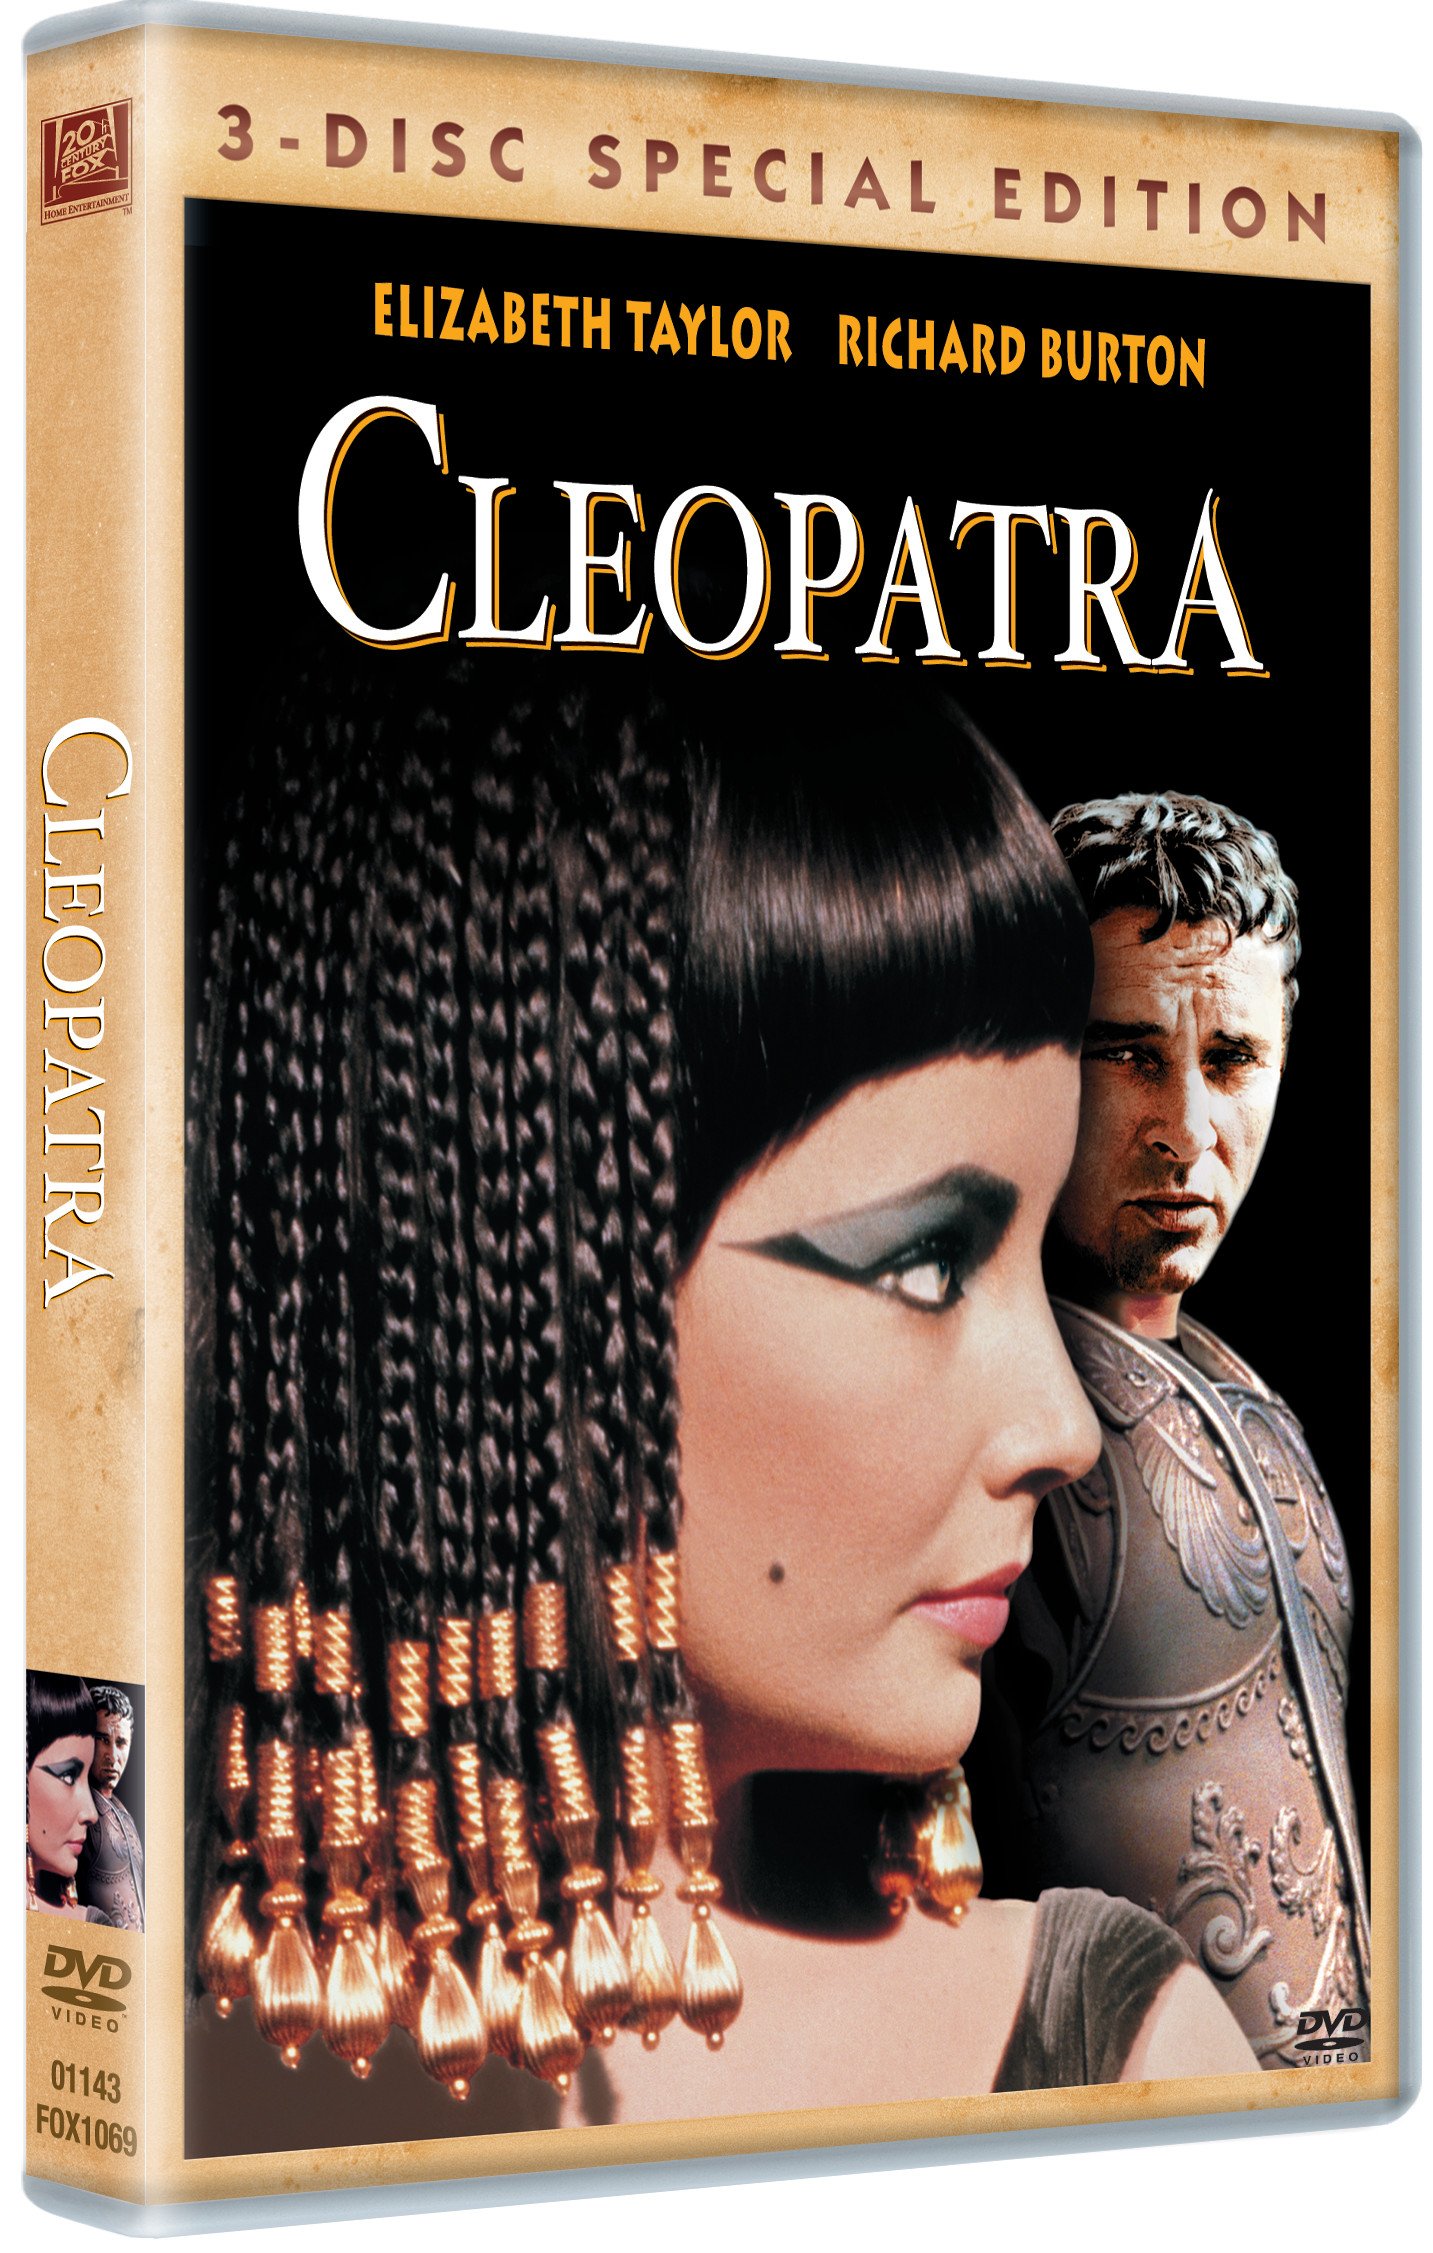 cleopatra-extended-edition-3-disc-movie-purchase-or-watch-online